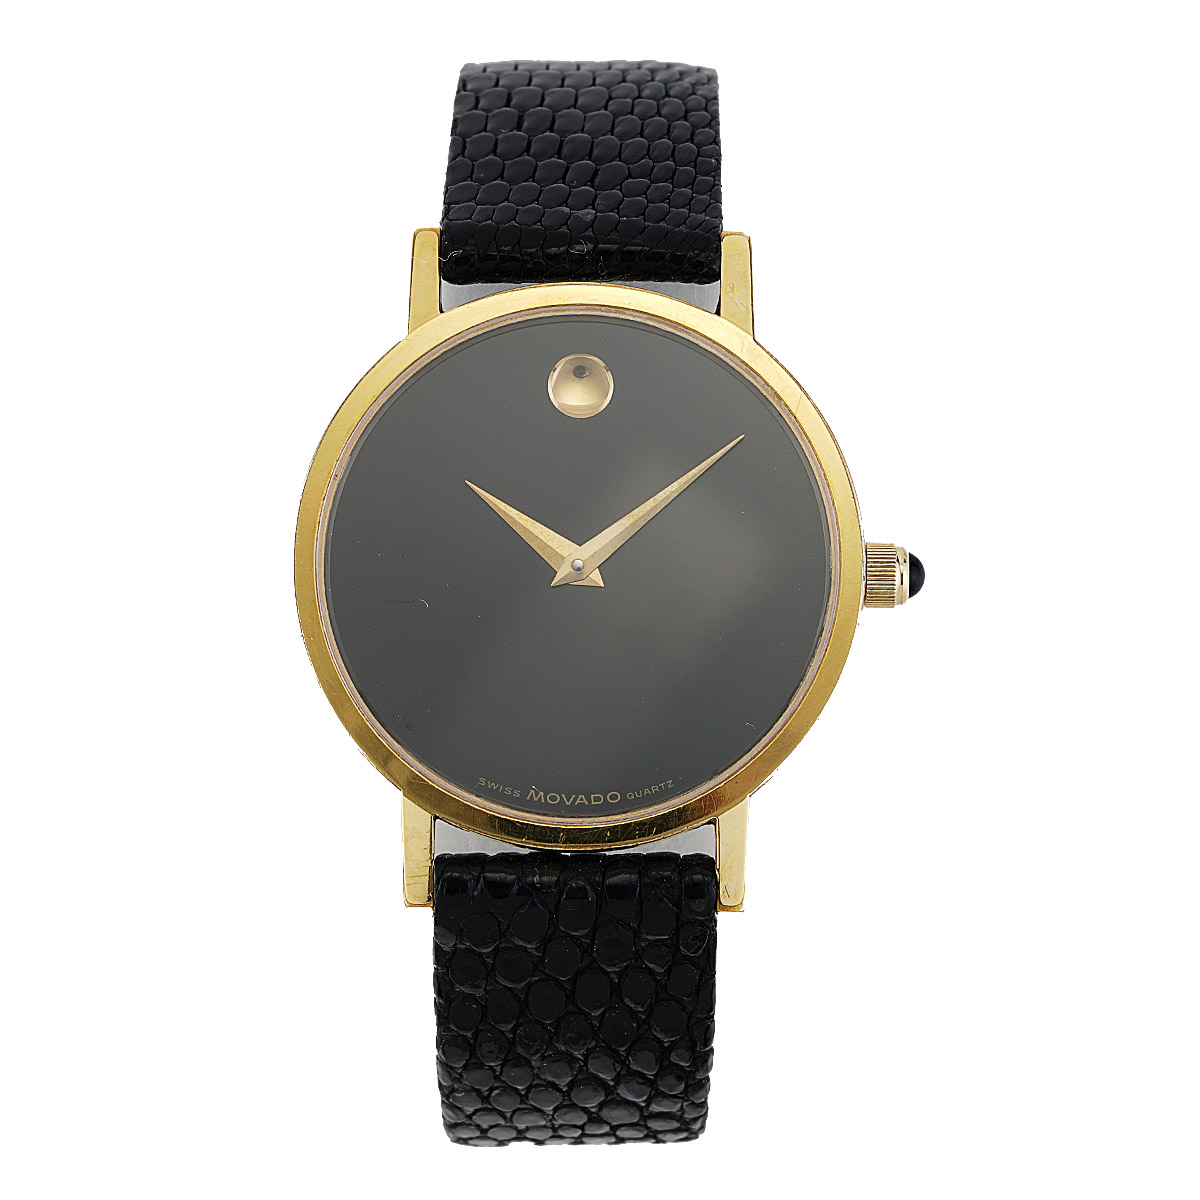 MOVADO Men's Extra Large Museum Style Watch SS w/ Black Dial - $1.5K A